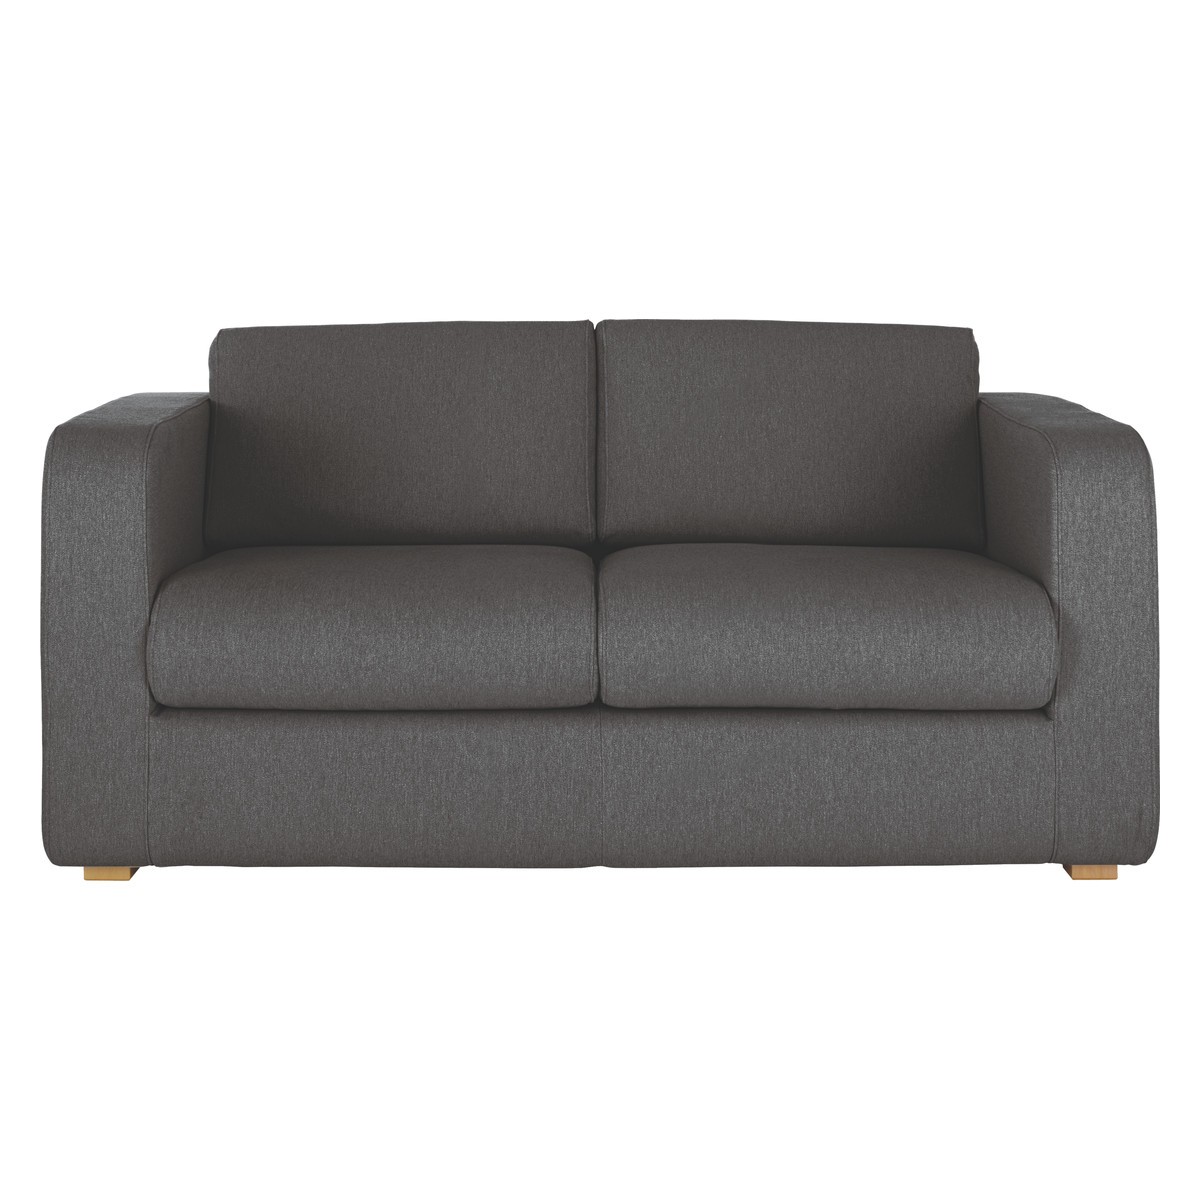 2 seater sofa hover to zoom KRPDUWS